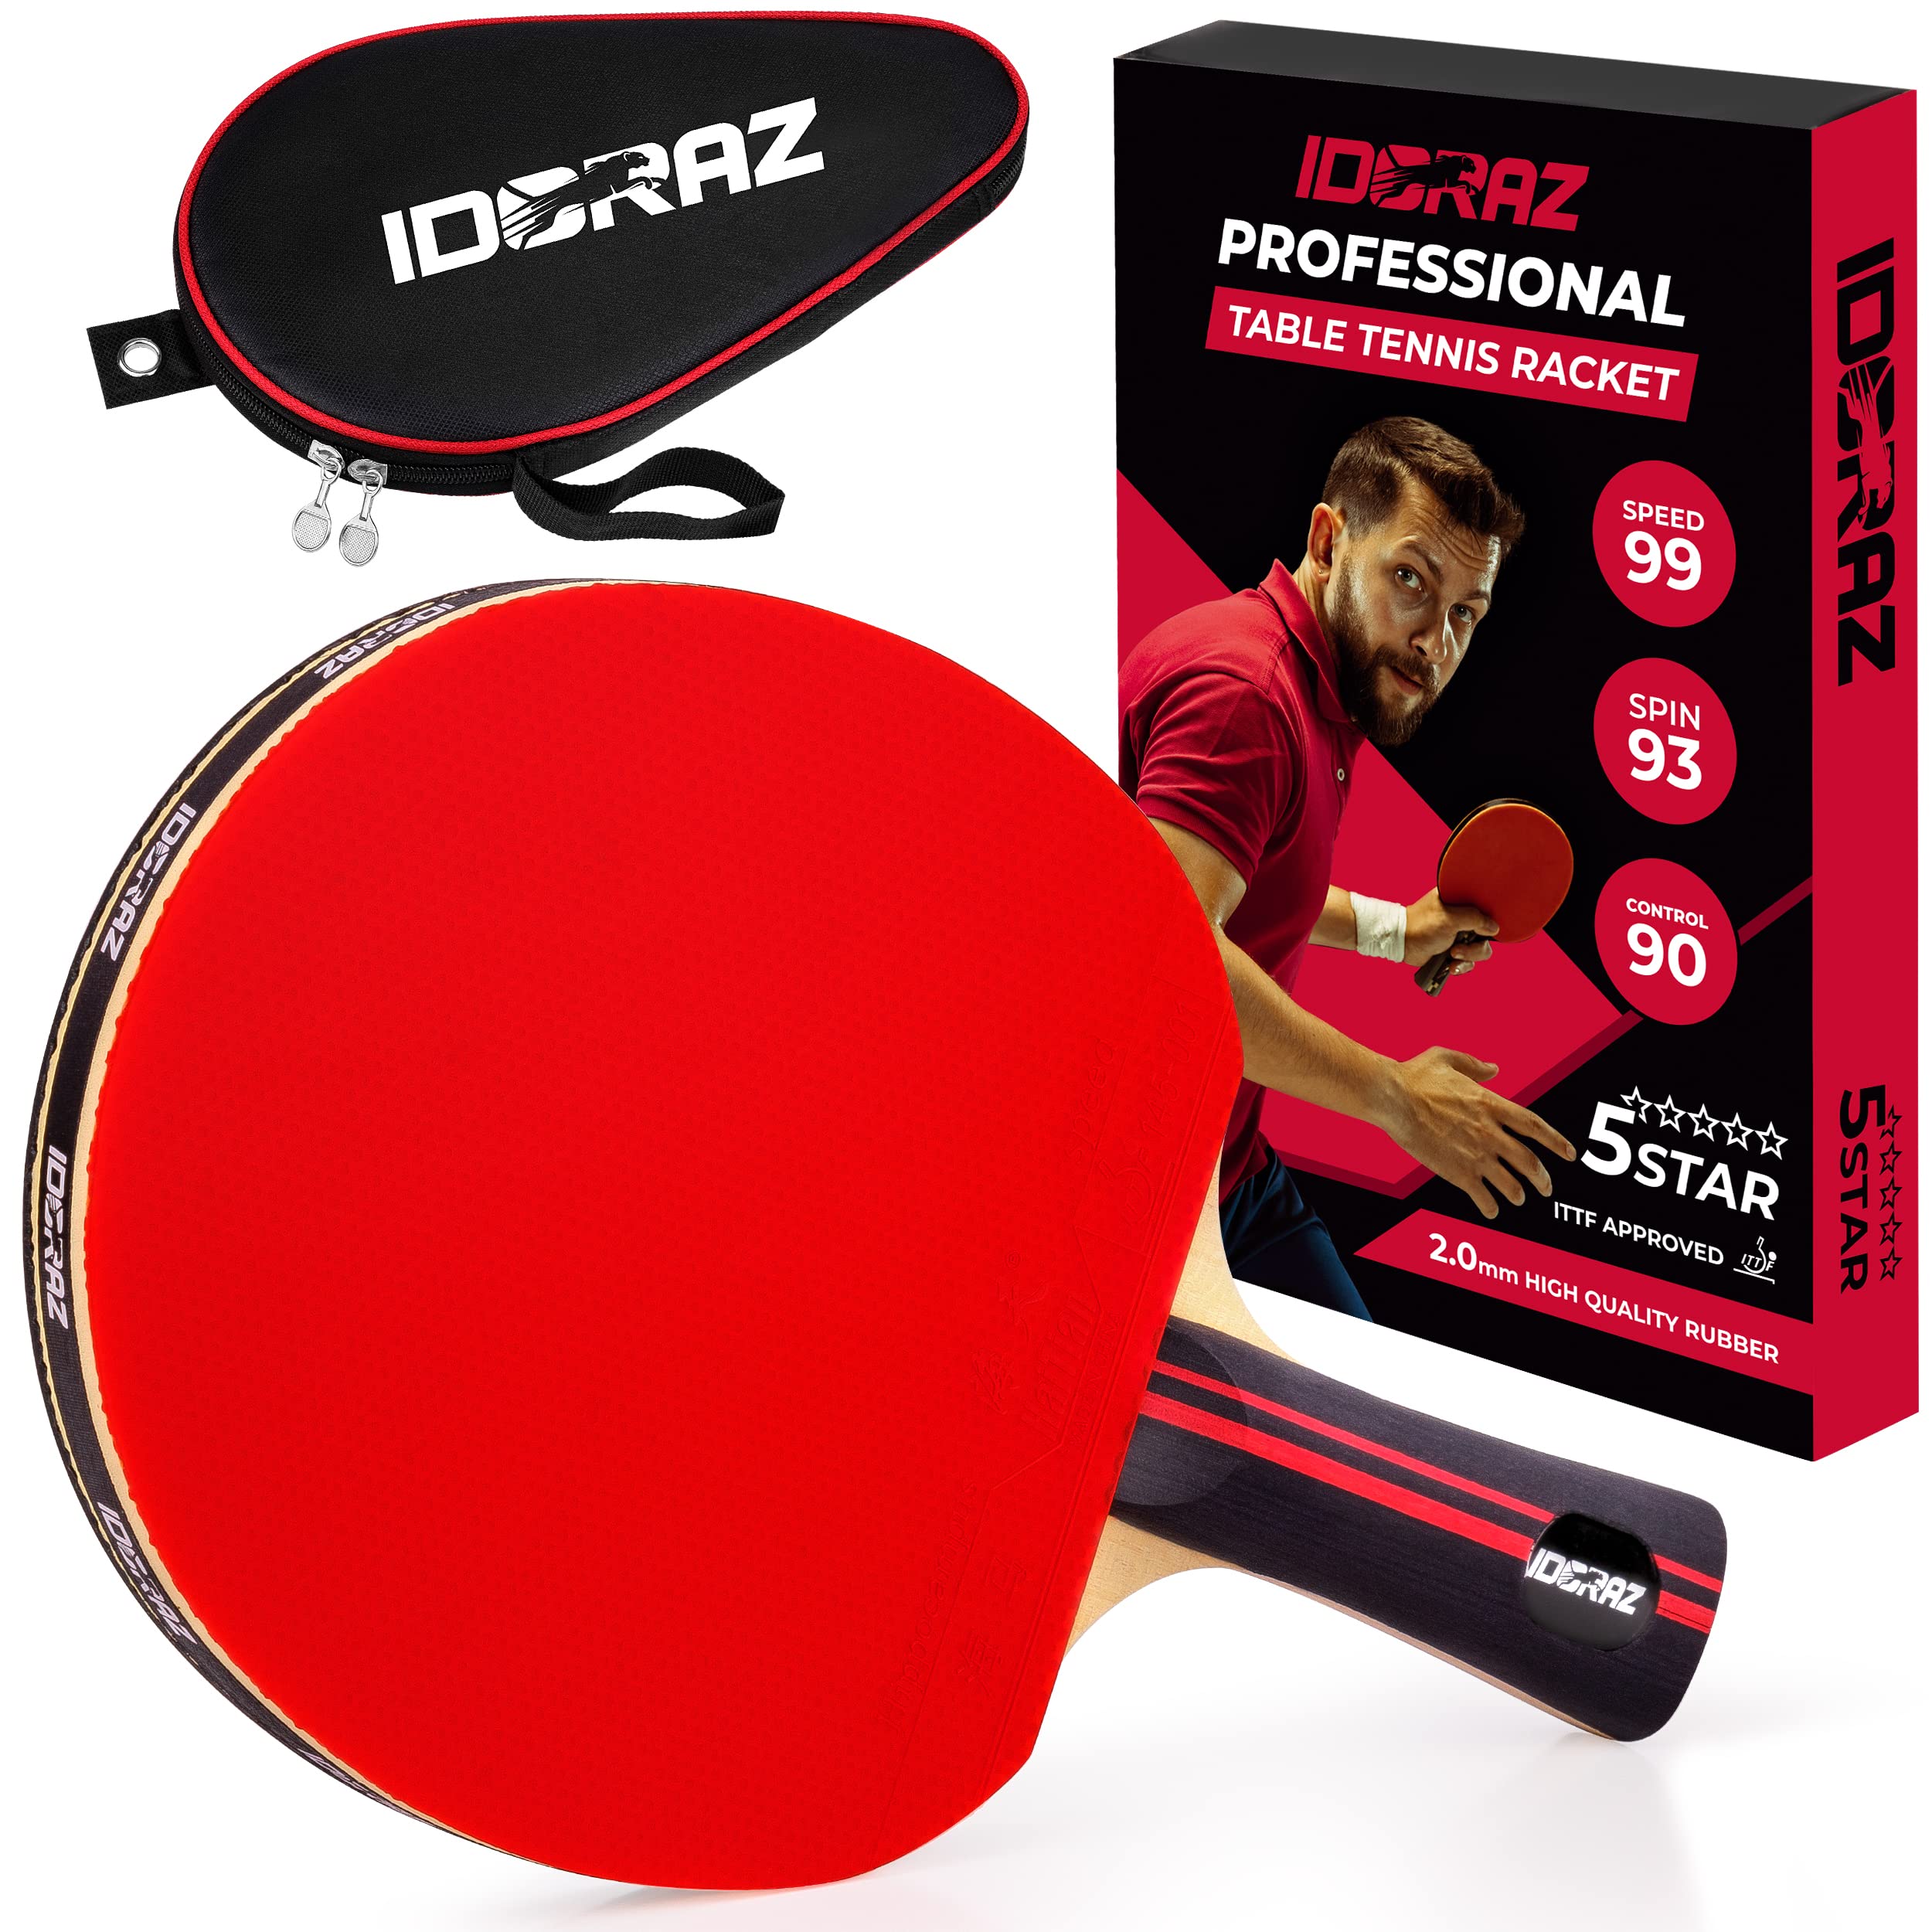 Idoraz Table Tennis Racket Professional Paddle - Ping Pong Racket with Carrying Case - ITTF Approved Rubber for Tournament Play